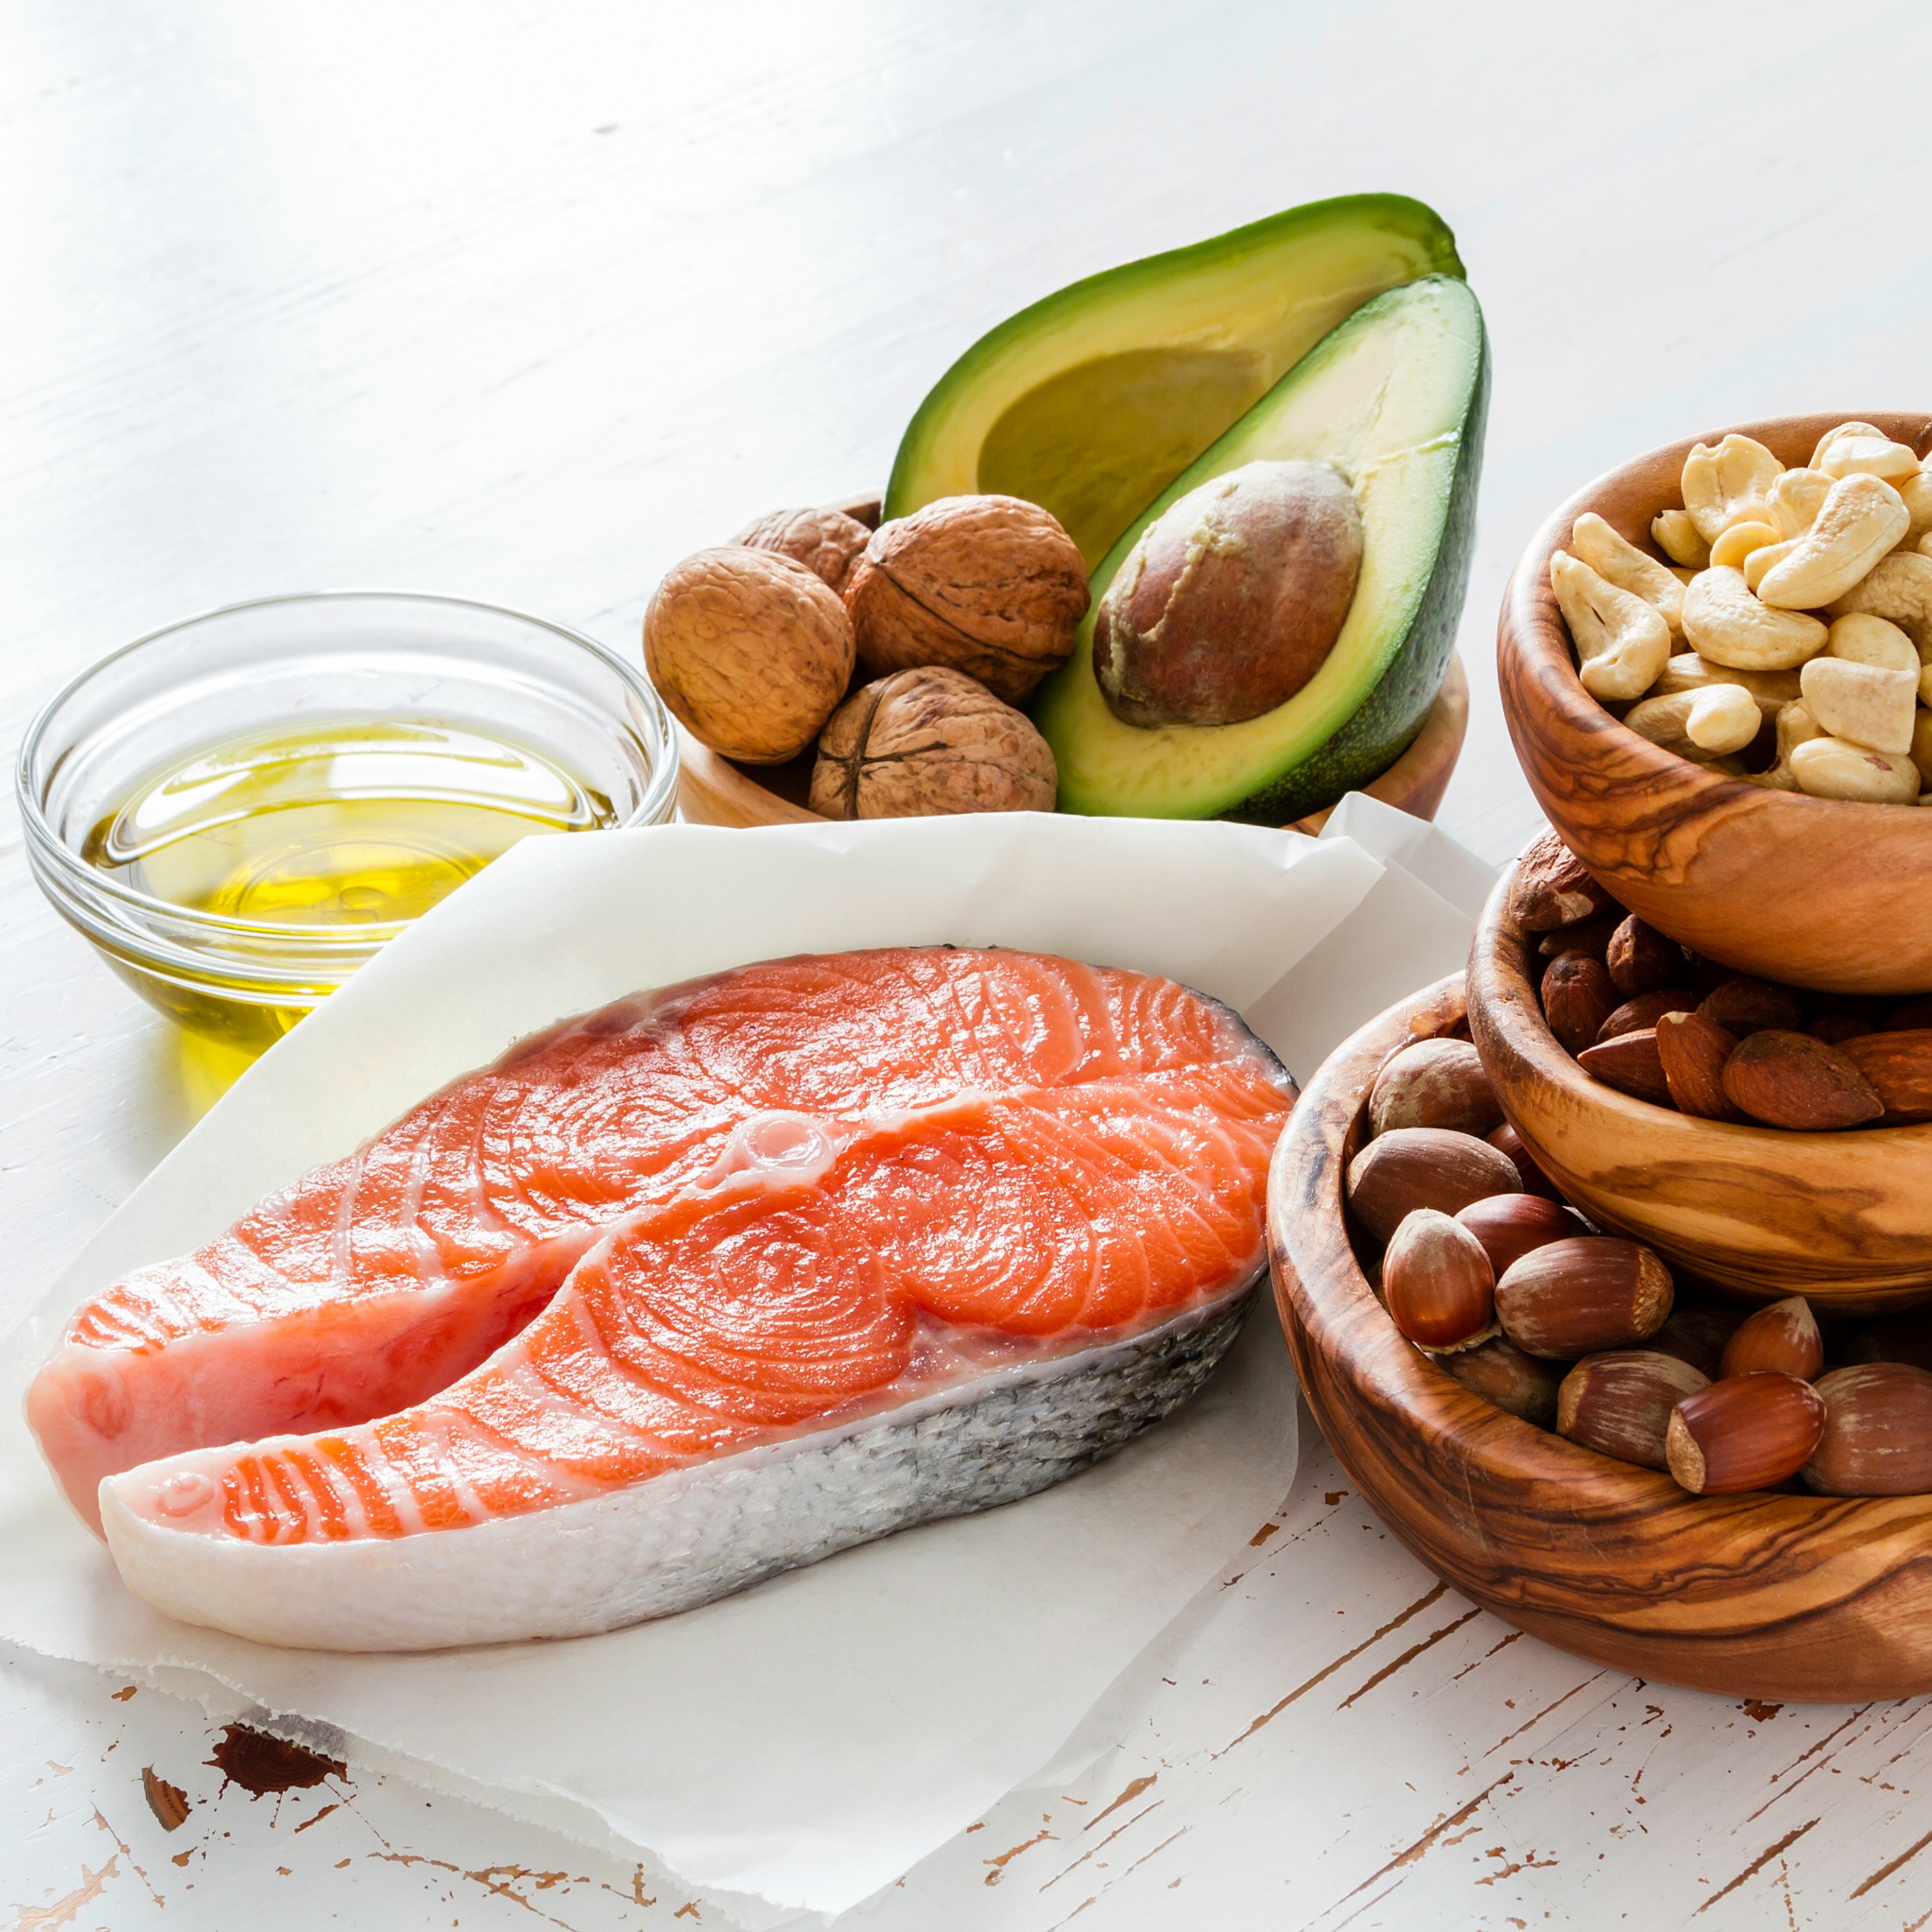 Healthy Habits: All About Fats